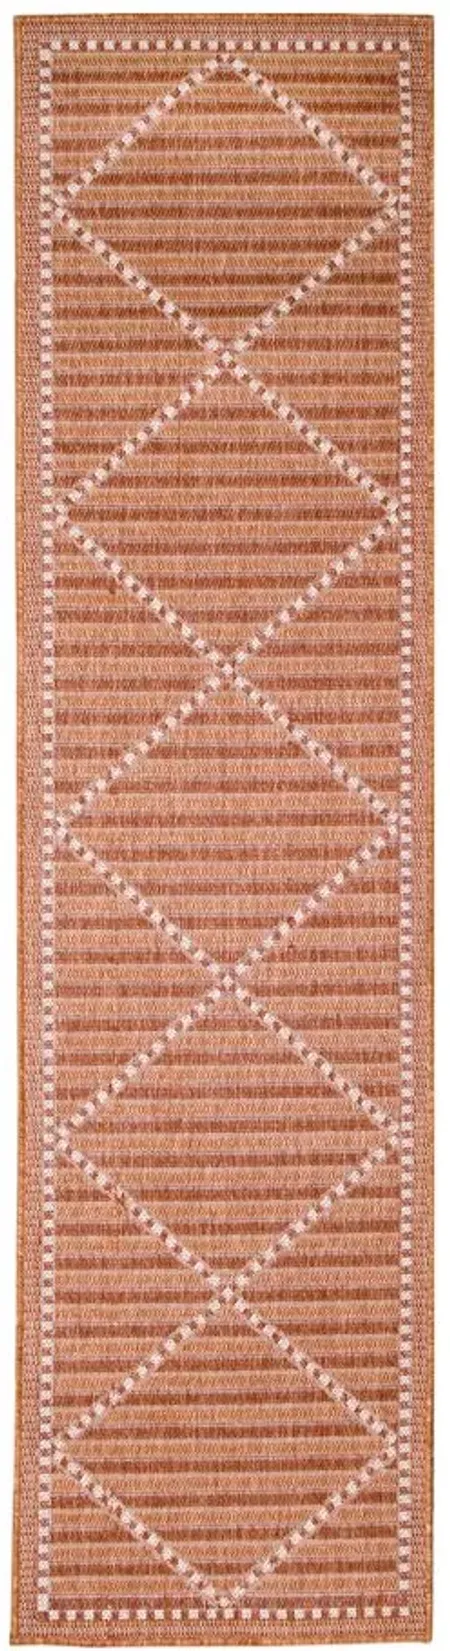 Liora Manne Malibu Checker Diamond Indoor/Outdoor Runner Rug in Clay by Trans-Ocean Import Co Inc